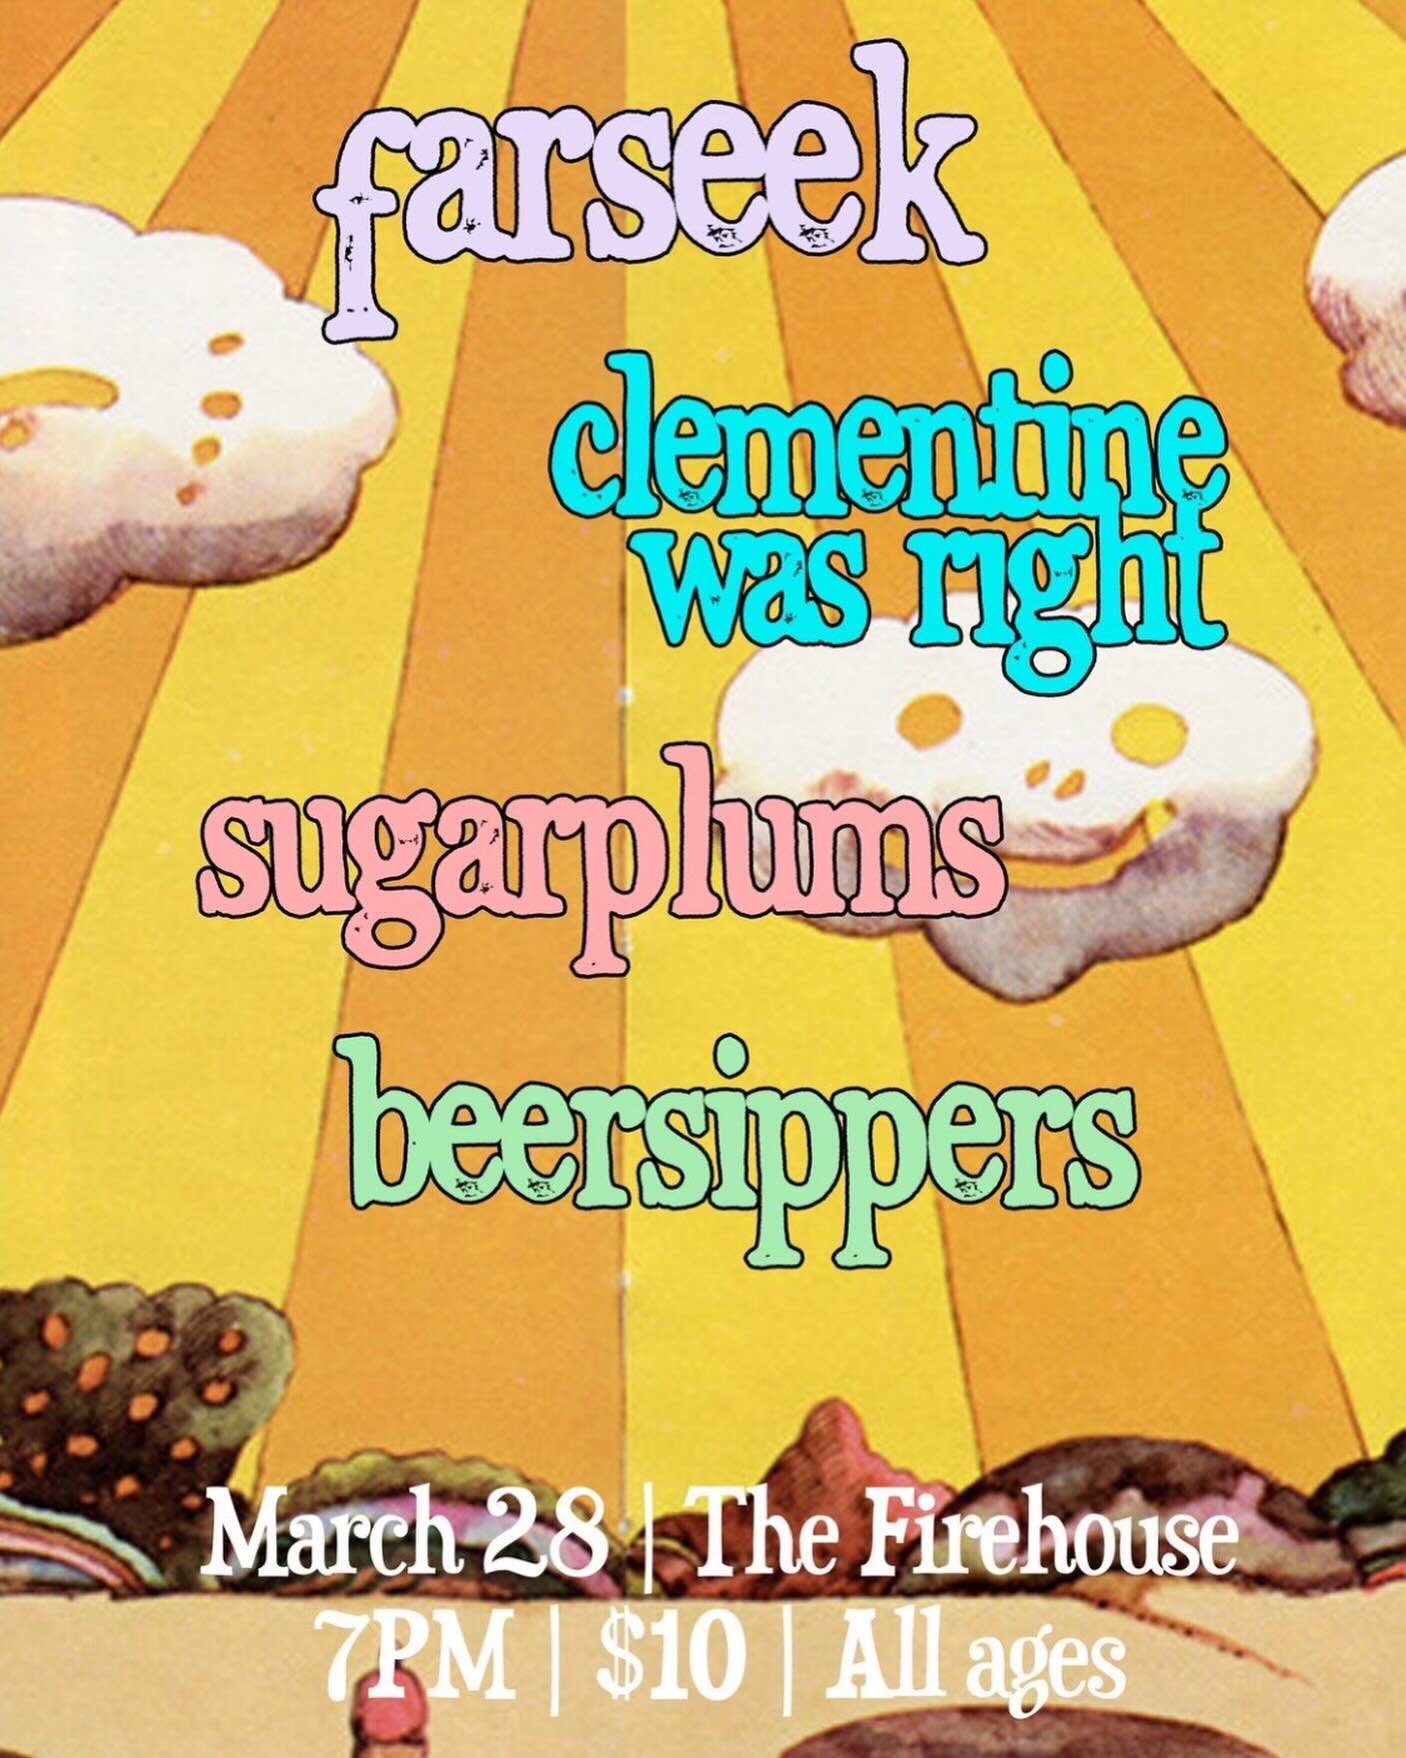 Thursday! Thursday! Thursday! Rockers @clementine_was_right with @farseekx along with locals @sugarplumsband and @beeersipppers !

This will be an indie rock extravaganza that you won&rsquo;t want to miss!!! I know for a fact that we will hear &ldquo